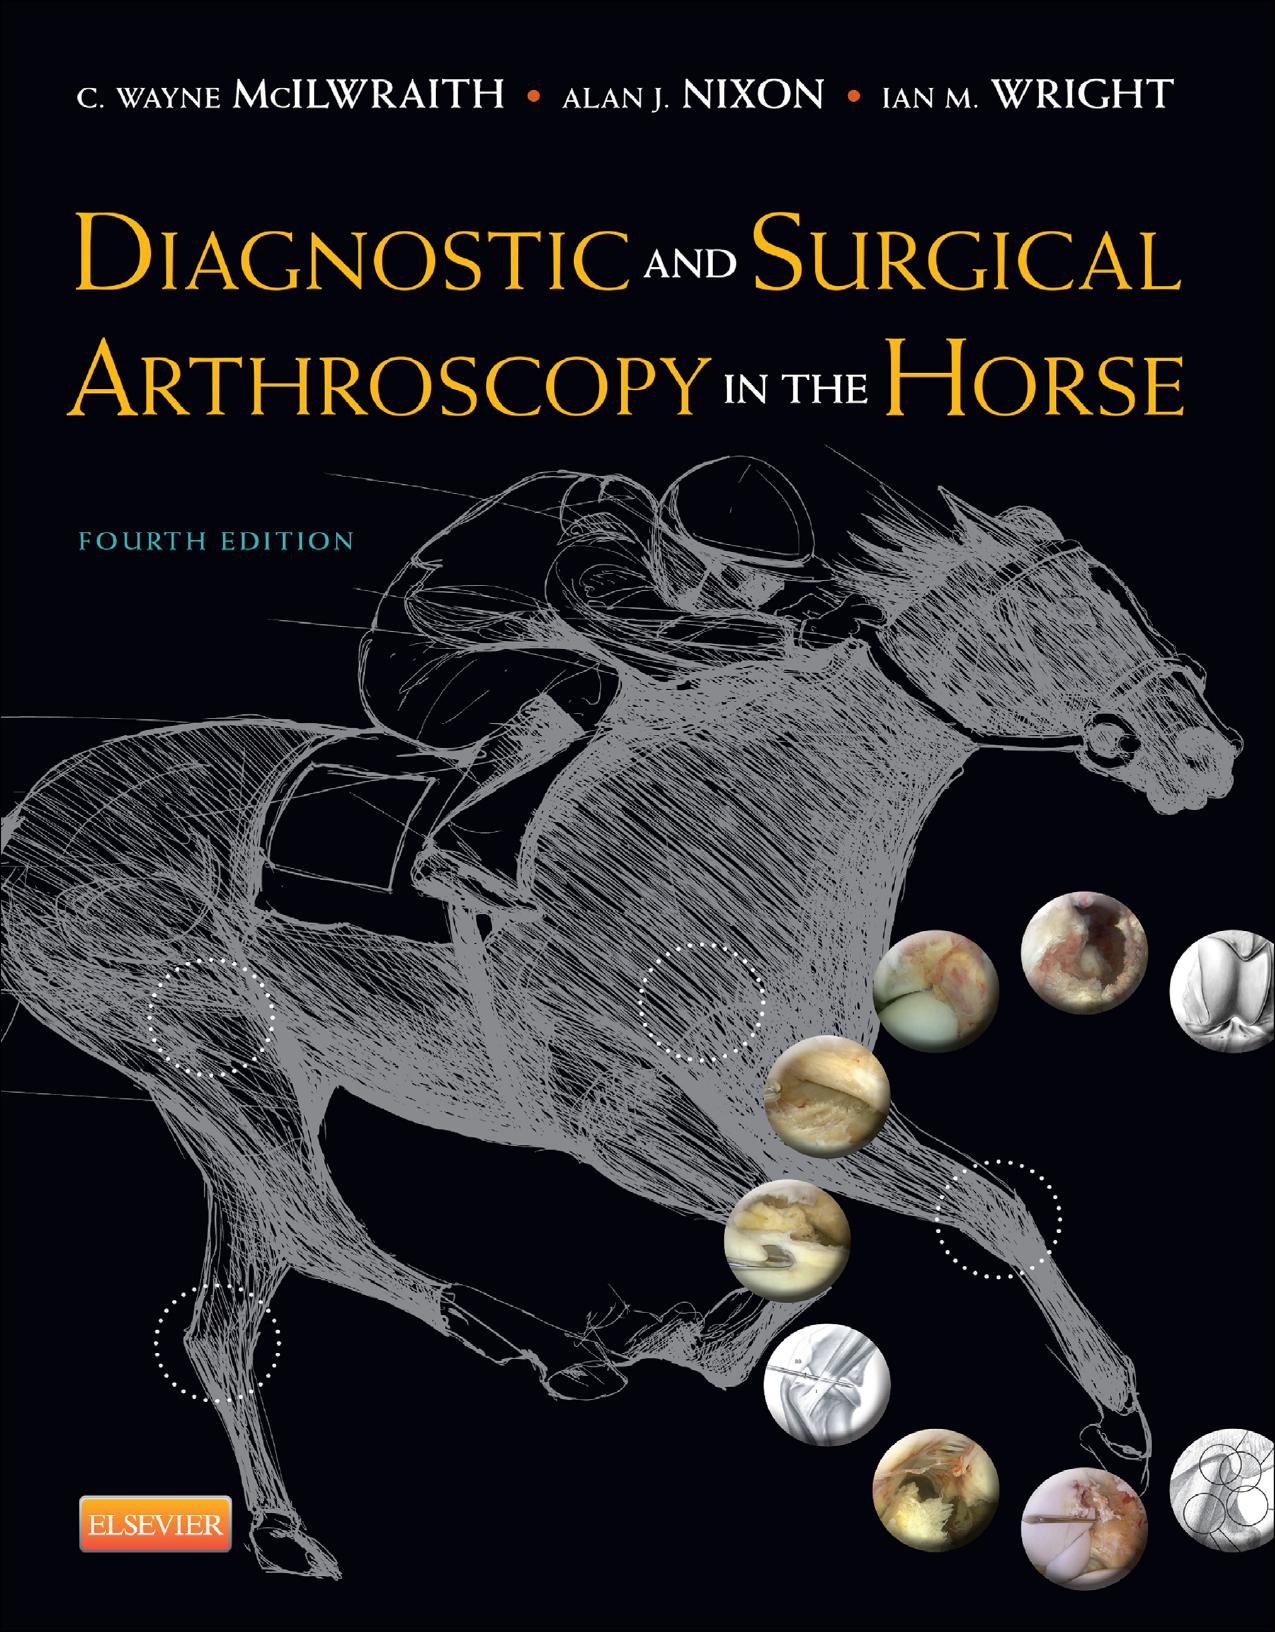 Diagnostic and Surgical Arthroscopy in the Horse 4th Edition 2015